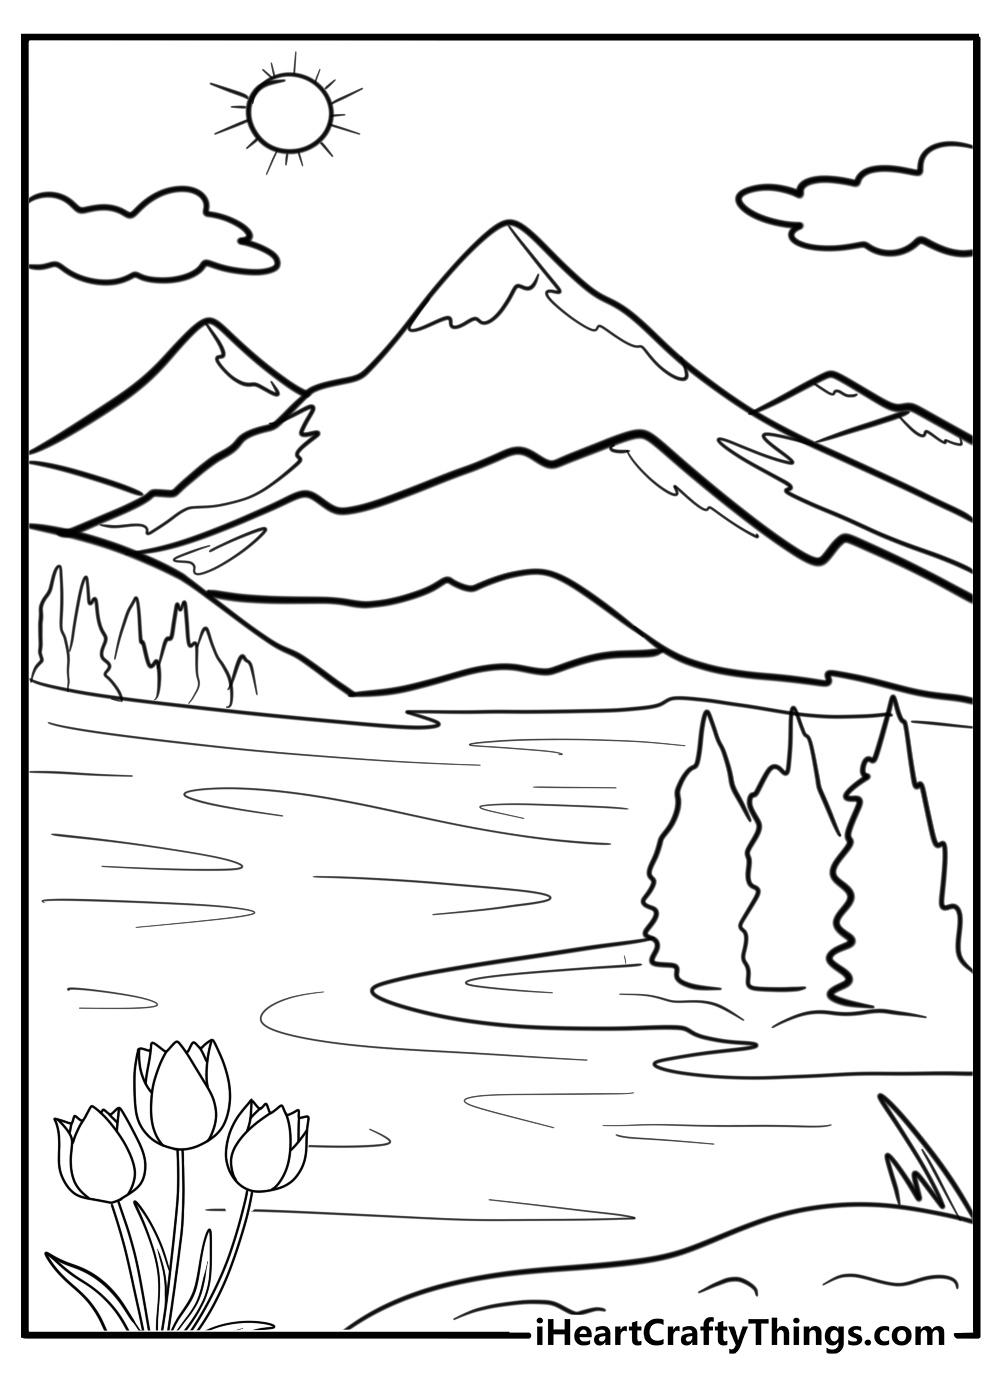 Free nature coloring pages for adults